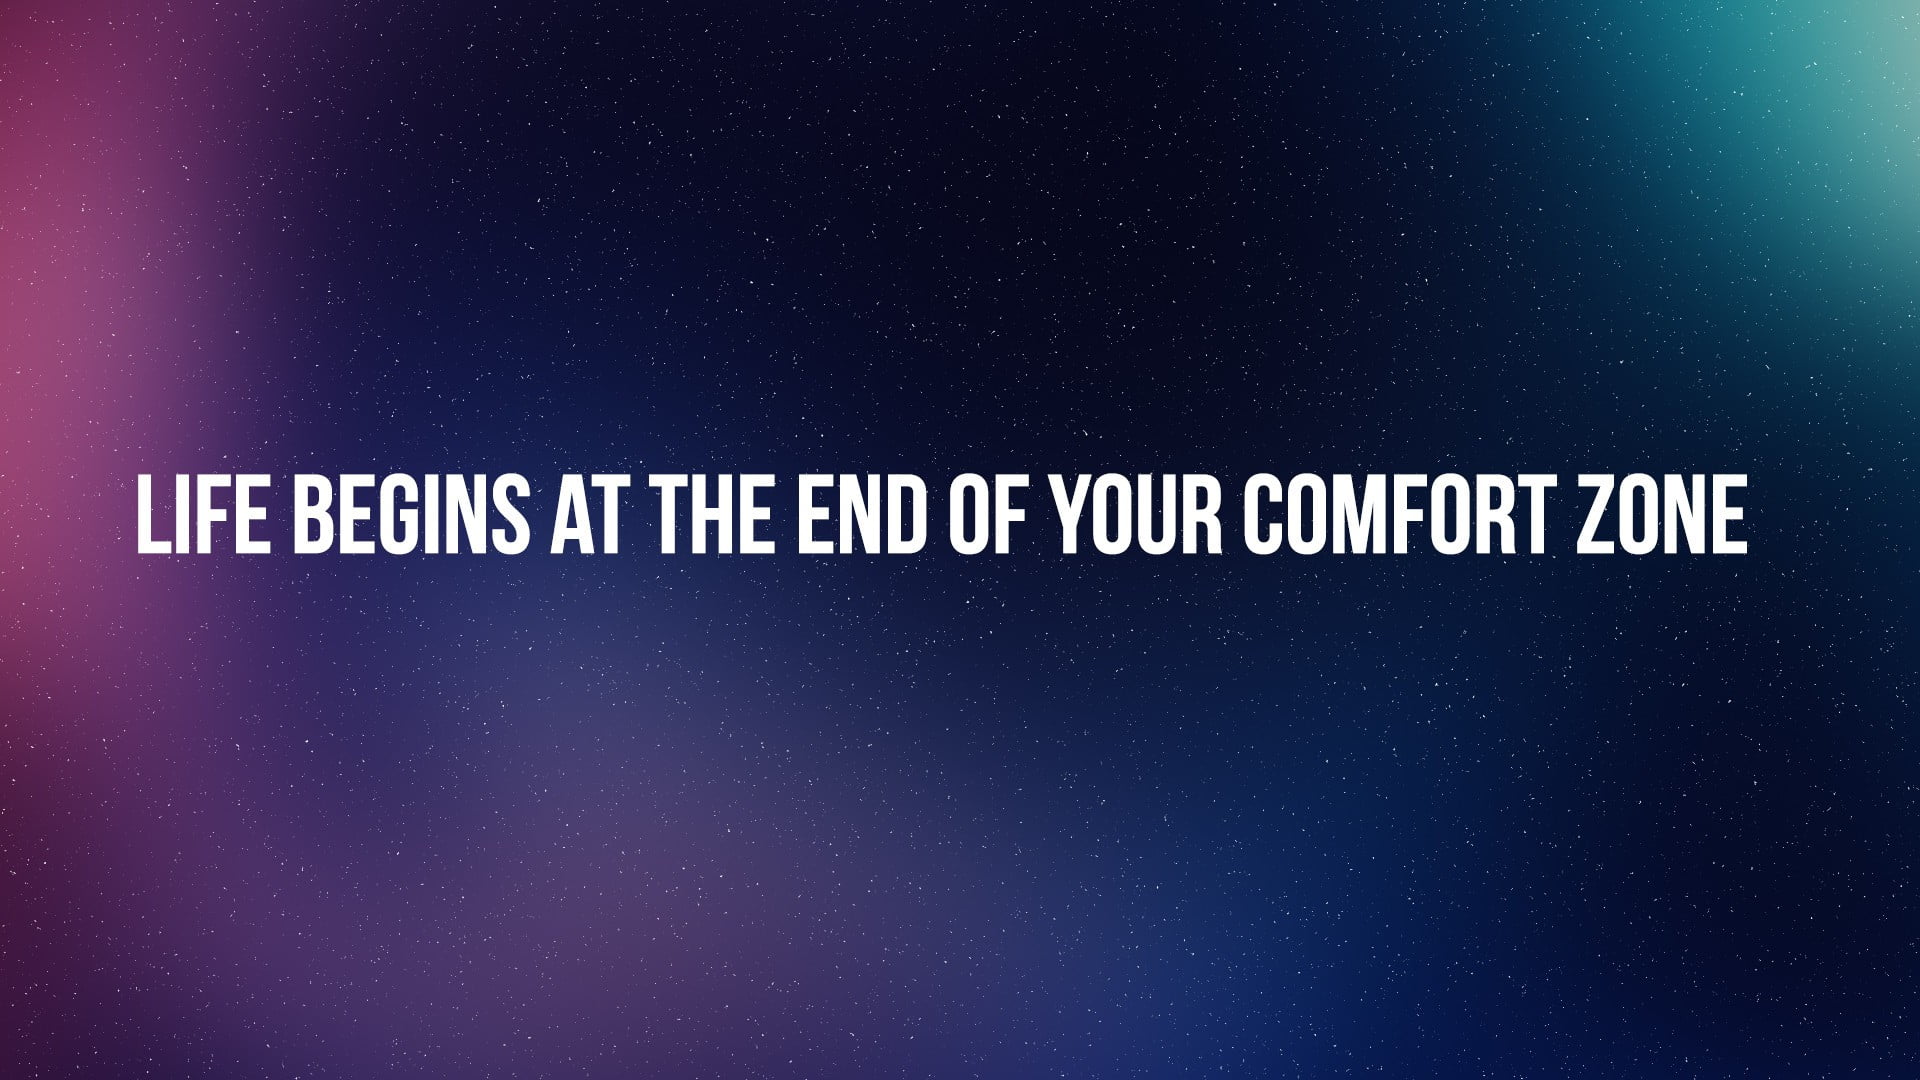 life begins at the end of your comfort zone text overlay